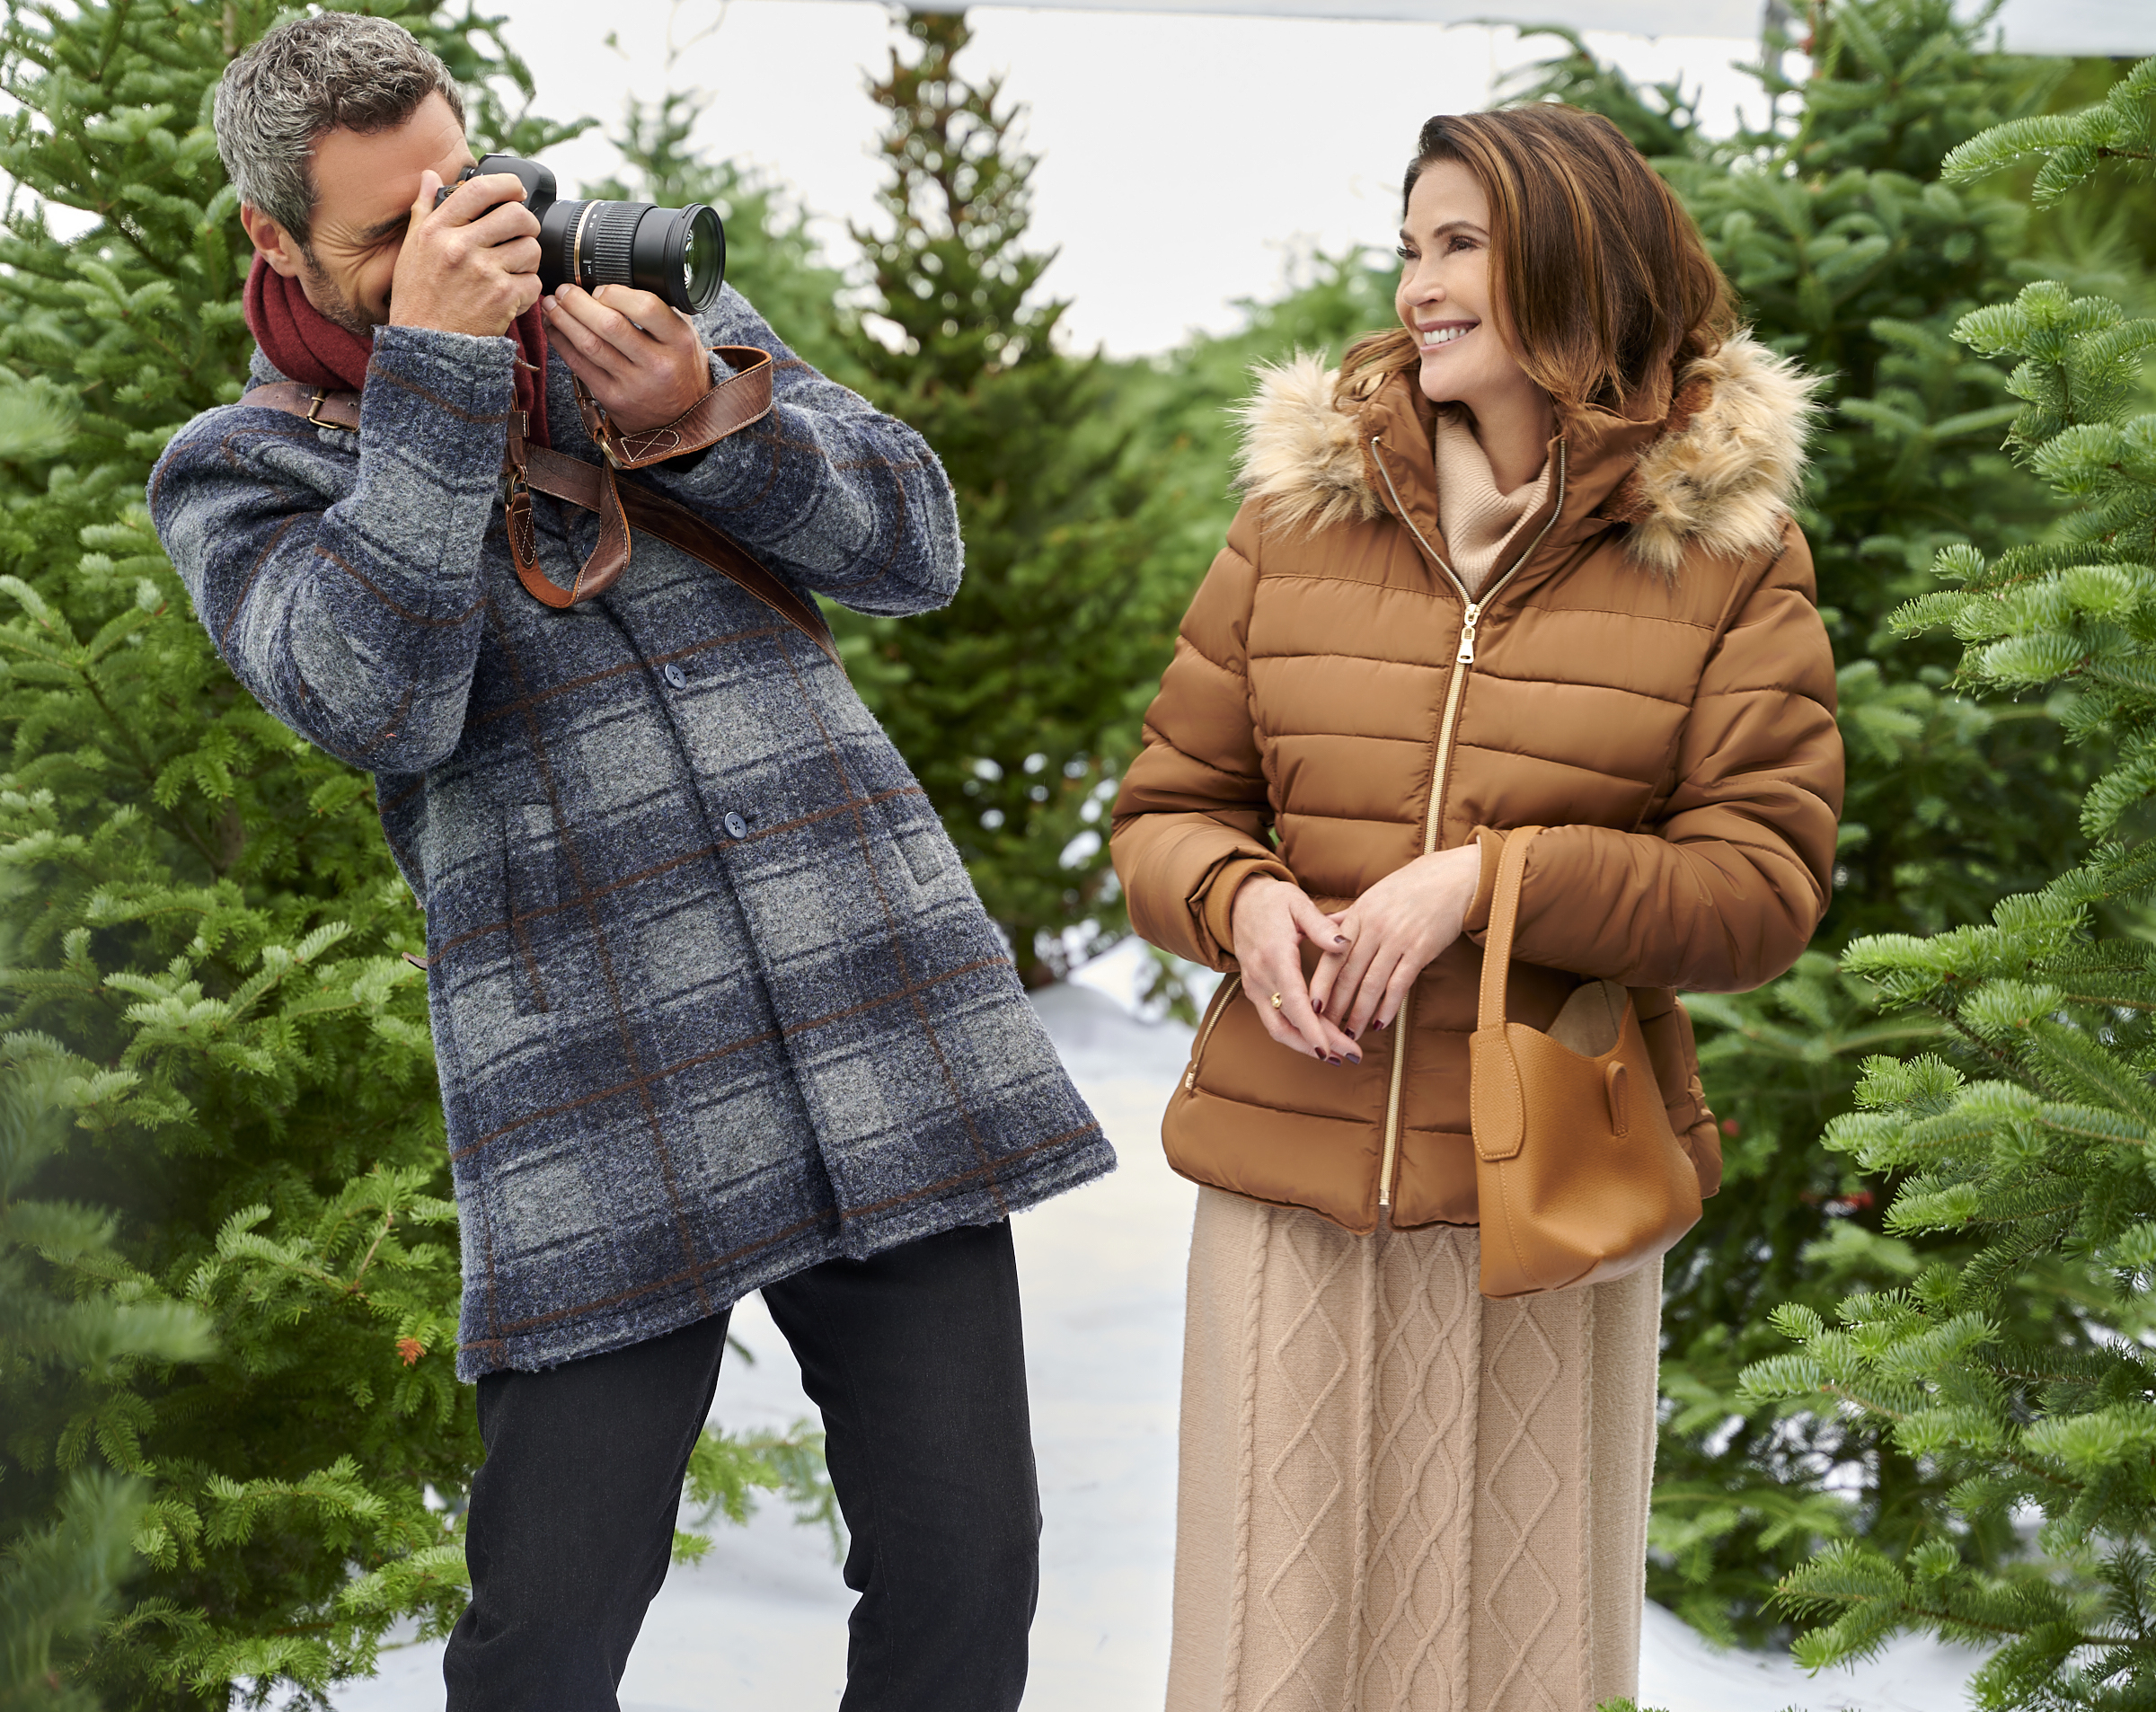 How to fall in Love by the Holidays-Terri Hatcher,Dan Payne/Photo Danielle Blancher